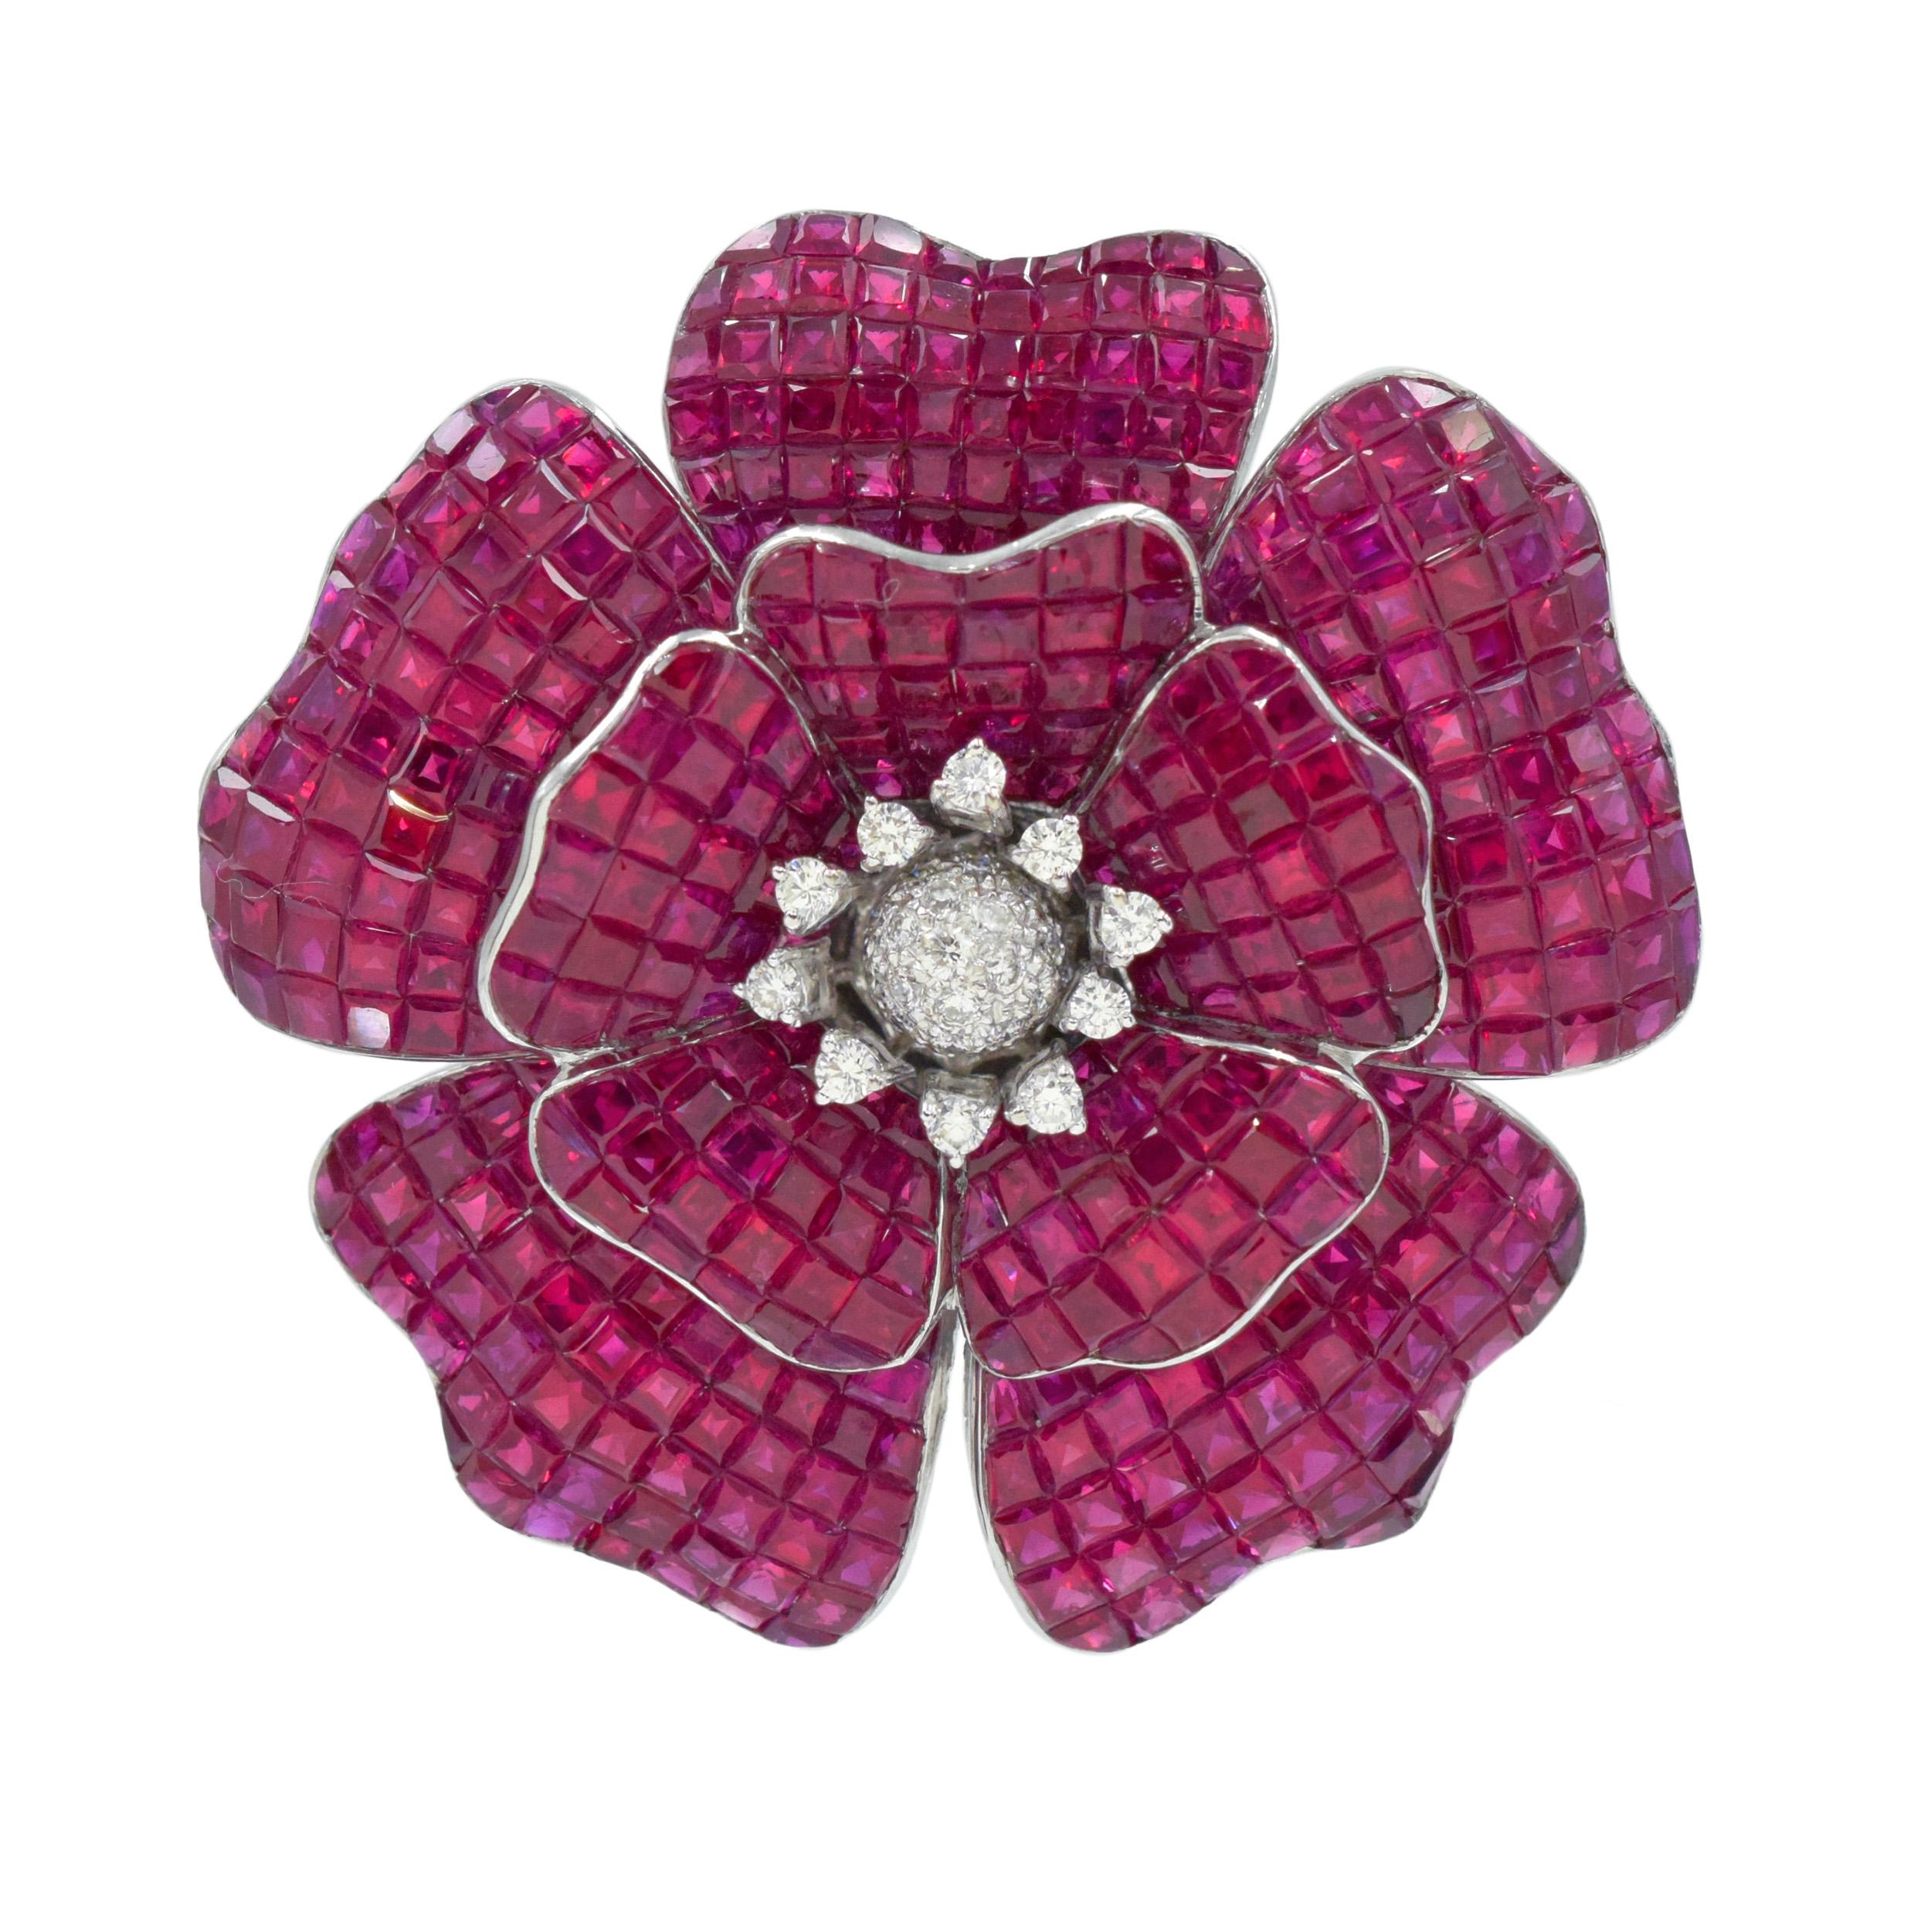 Ruby and diamond Poppy Flower brooch / pendant in 18k white gold. The brooch features poppy flower with 10 petals, each set with invisibly set square rubies with total weight of 60.15ct. Center of the flower accented with round brilliant cut